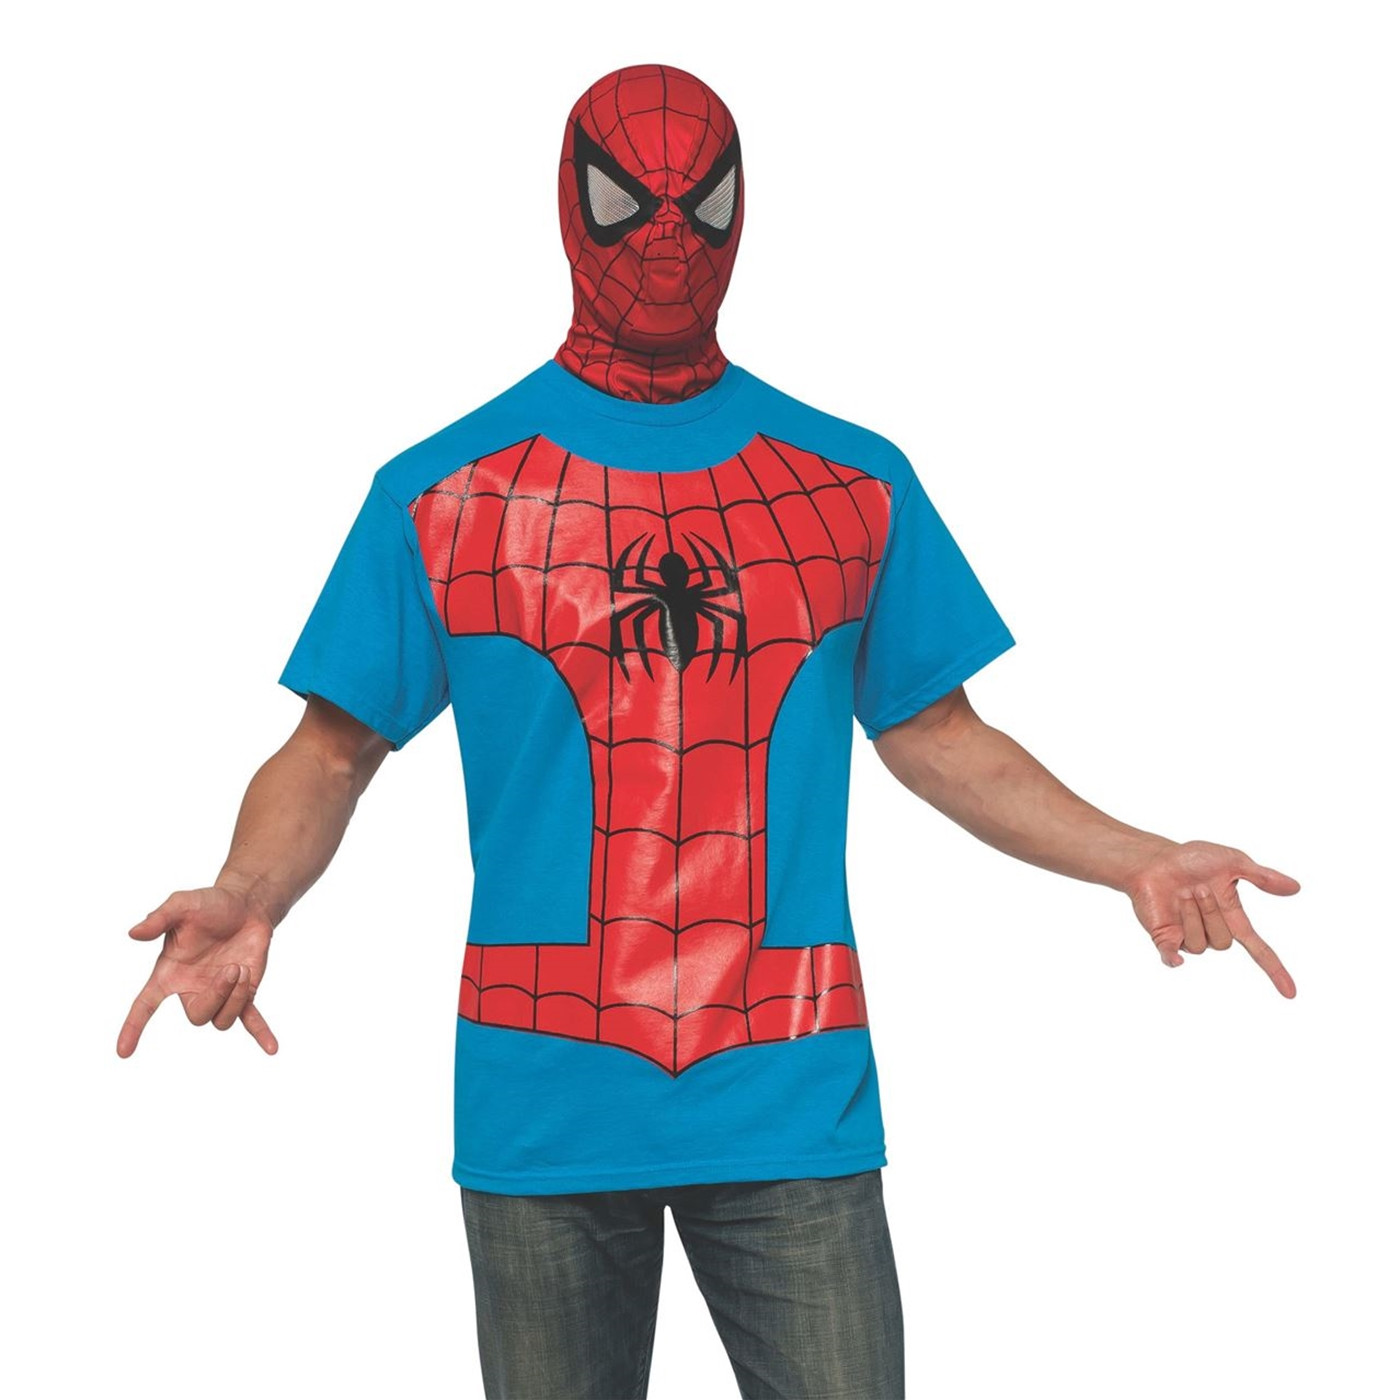 Spider-Man Costume T-Shirt with Mask